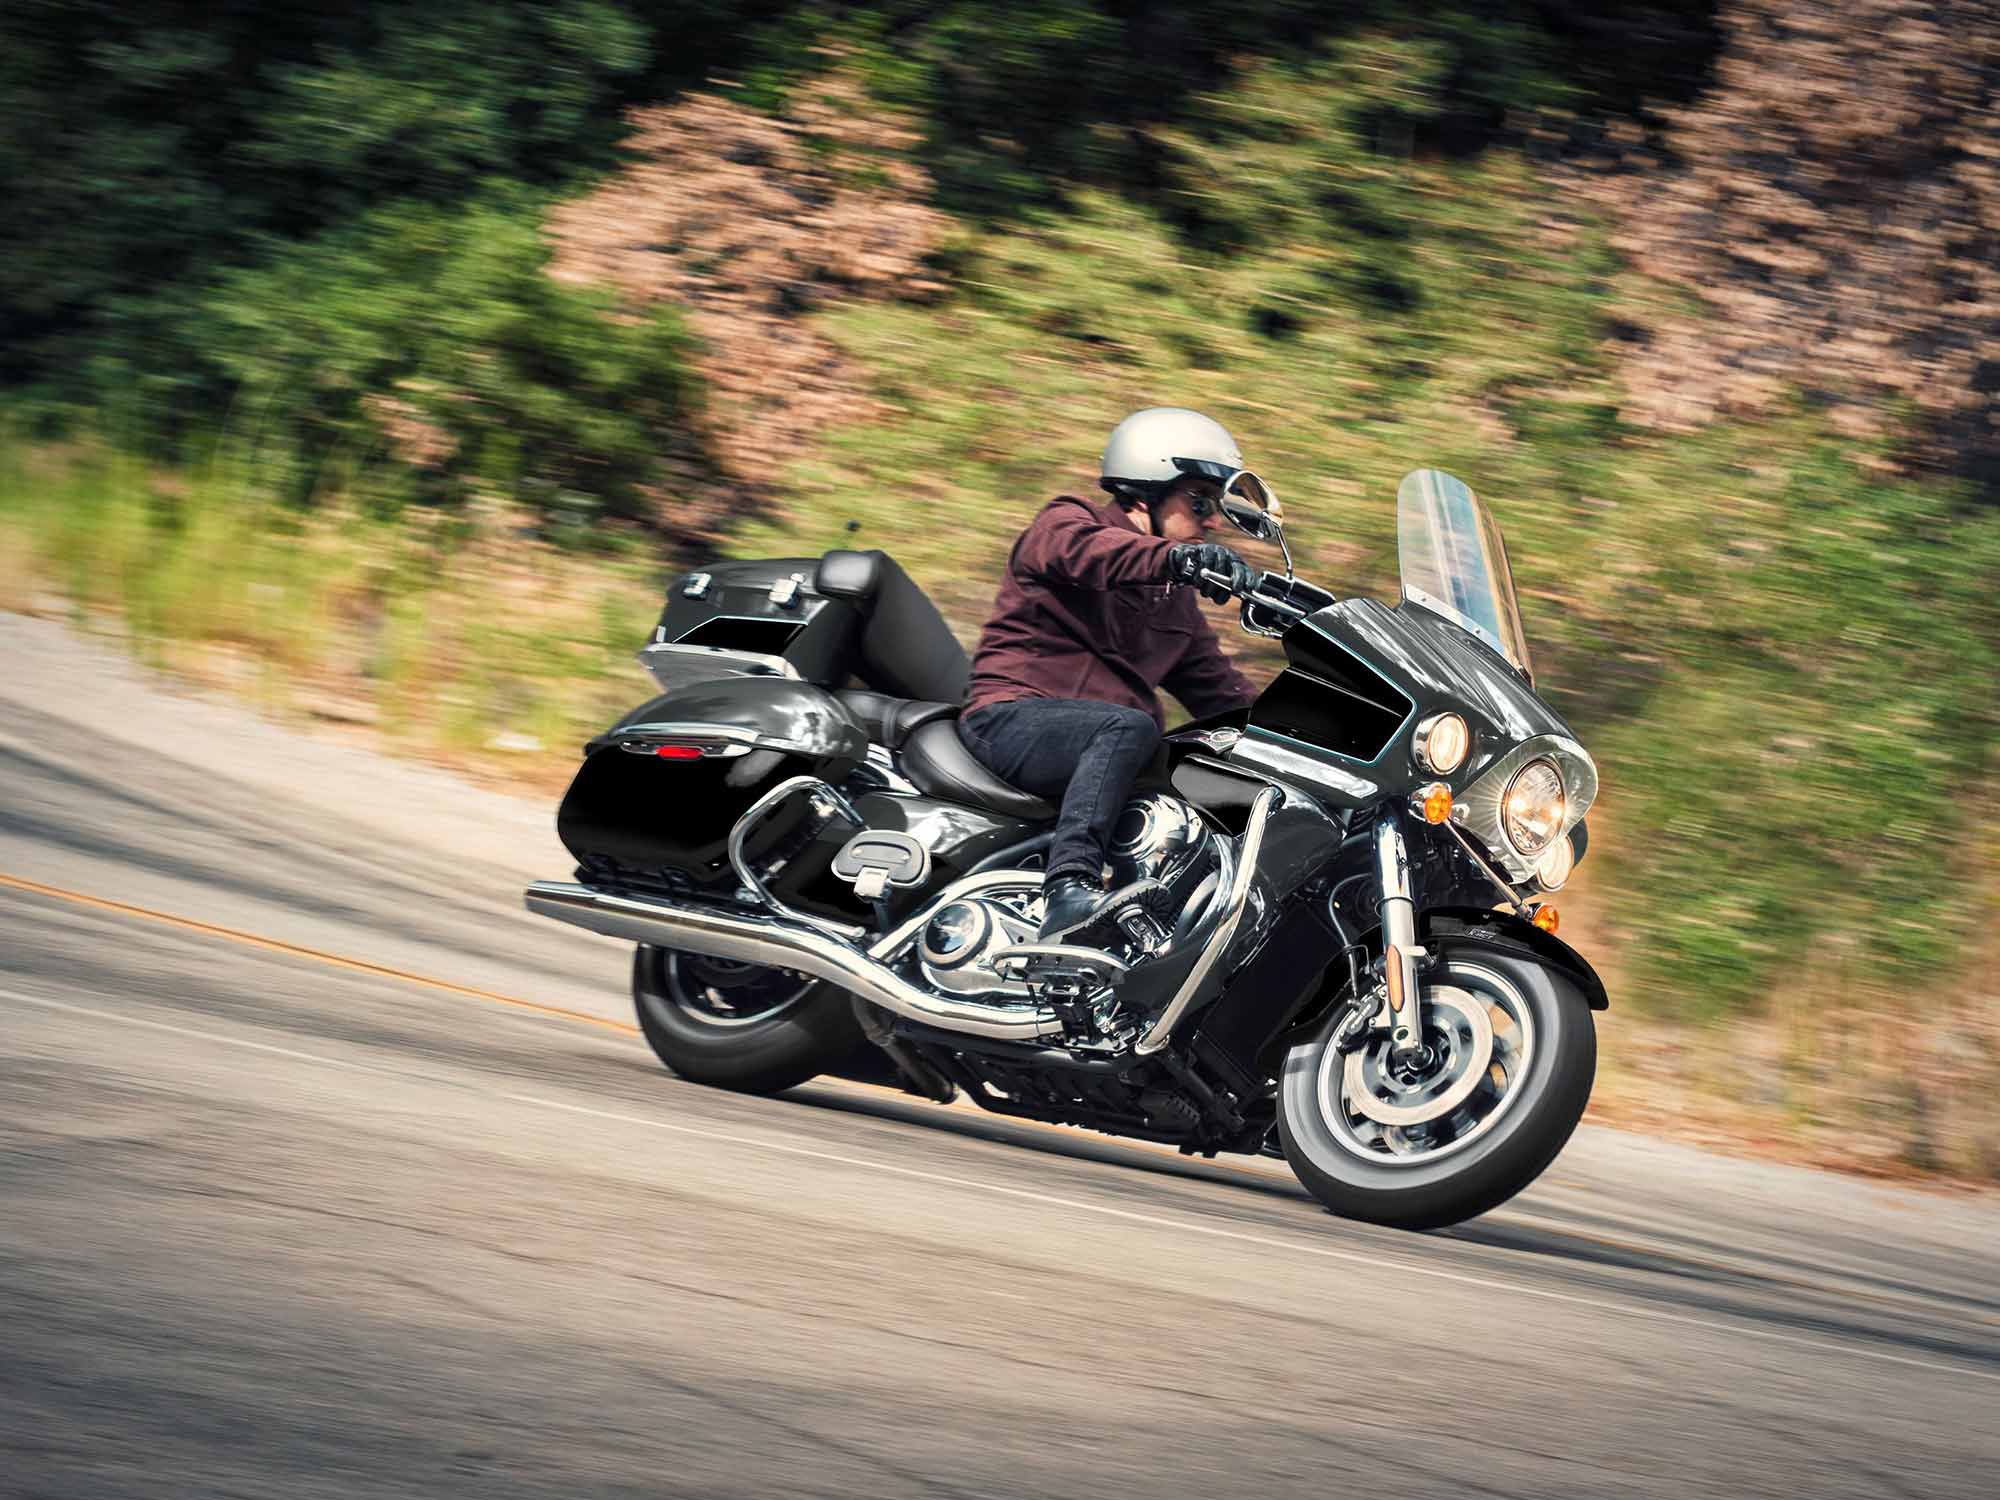 The Kawasaki Vulcan Voyager is classically styled and comfortable.